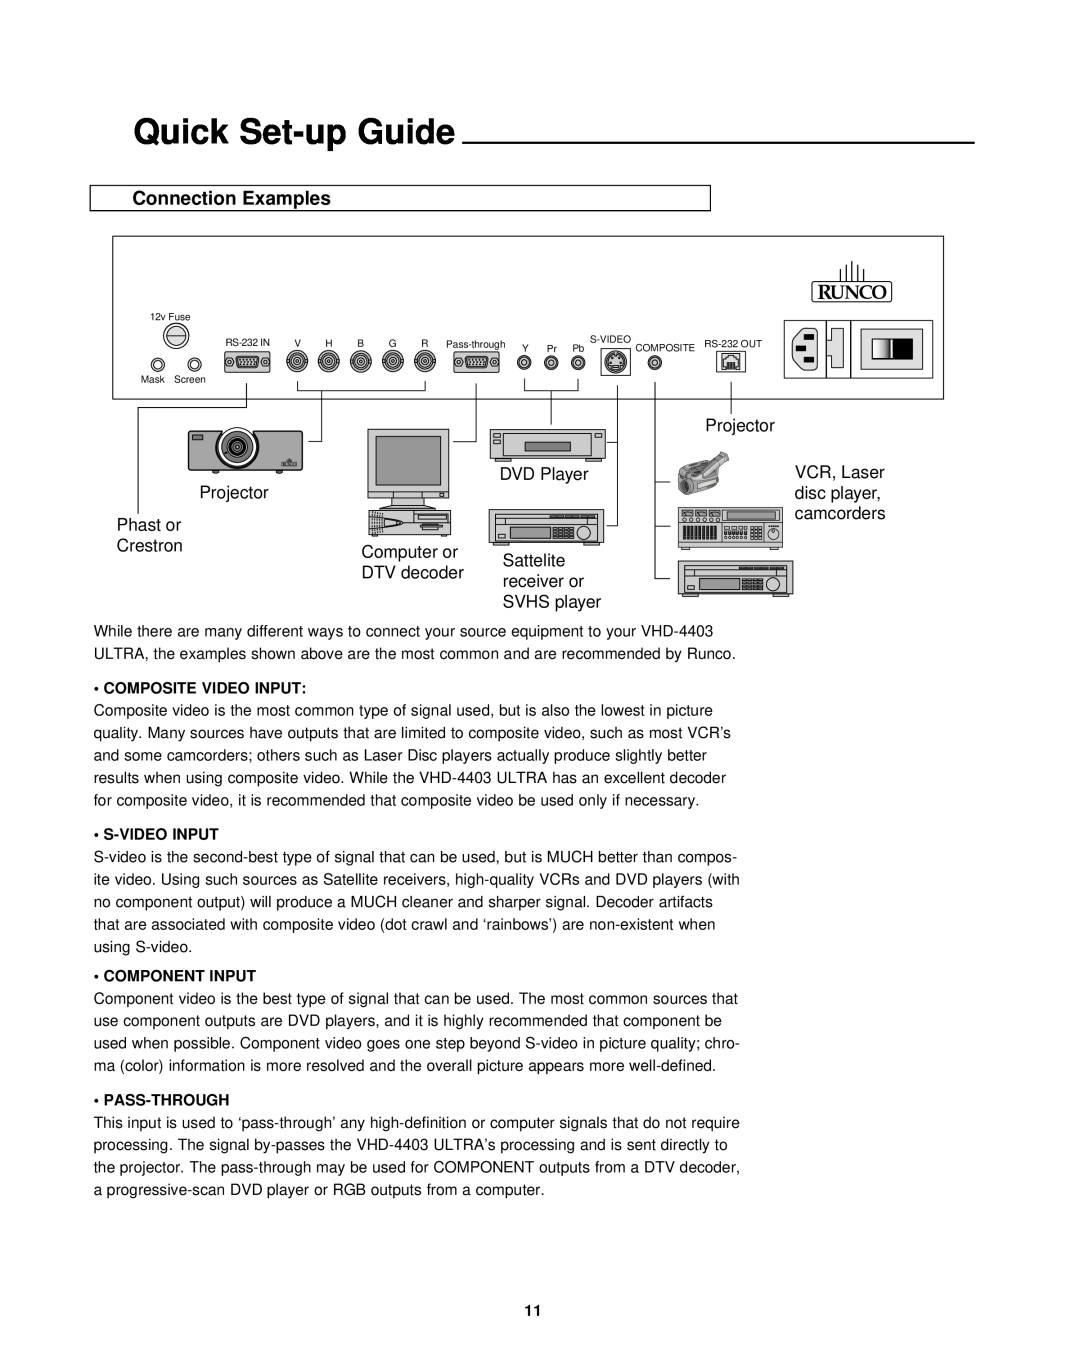 Runco virtual high definition processor with aspect ratio control manual Quick Set-upGuide, Connection Examples, Runco 